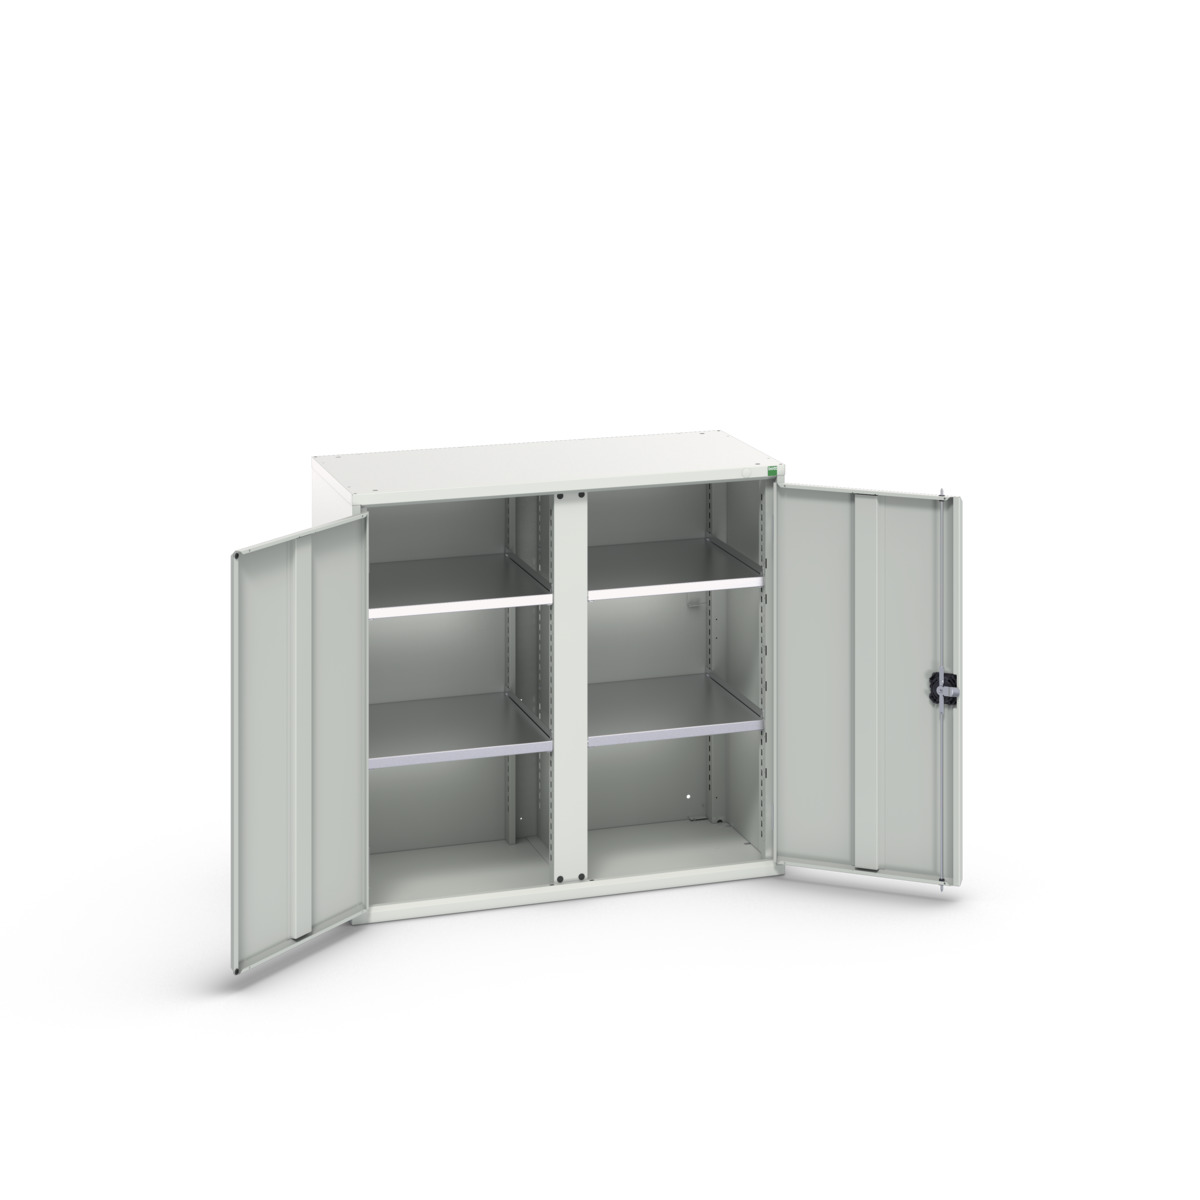 16926555.16 - verso kitted cupboard